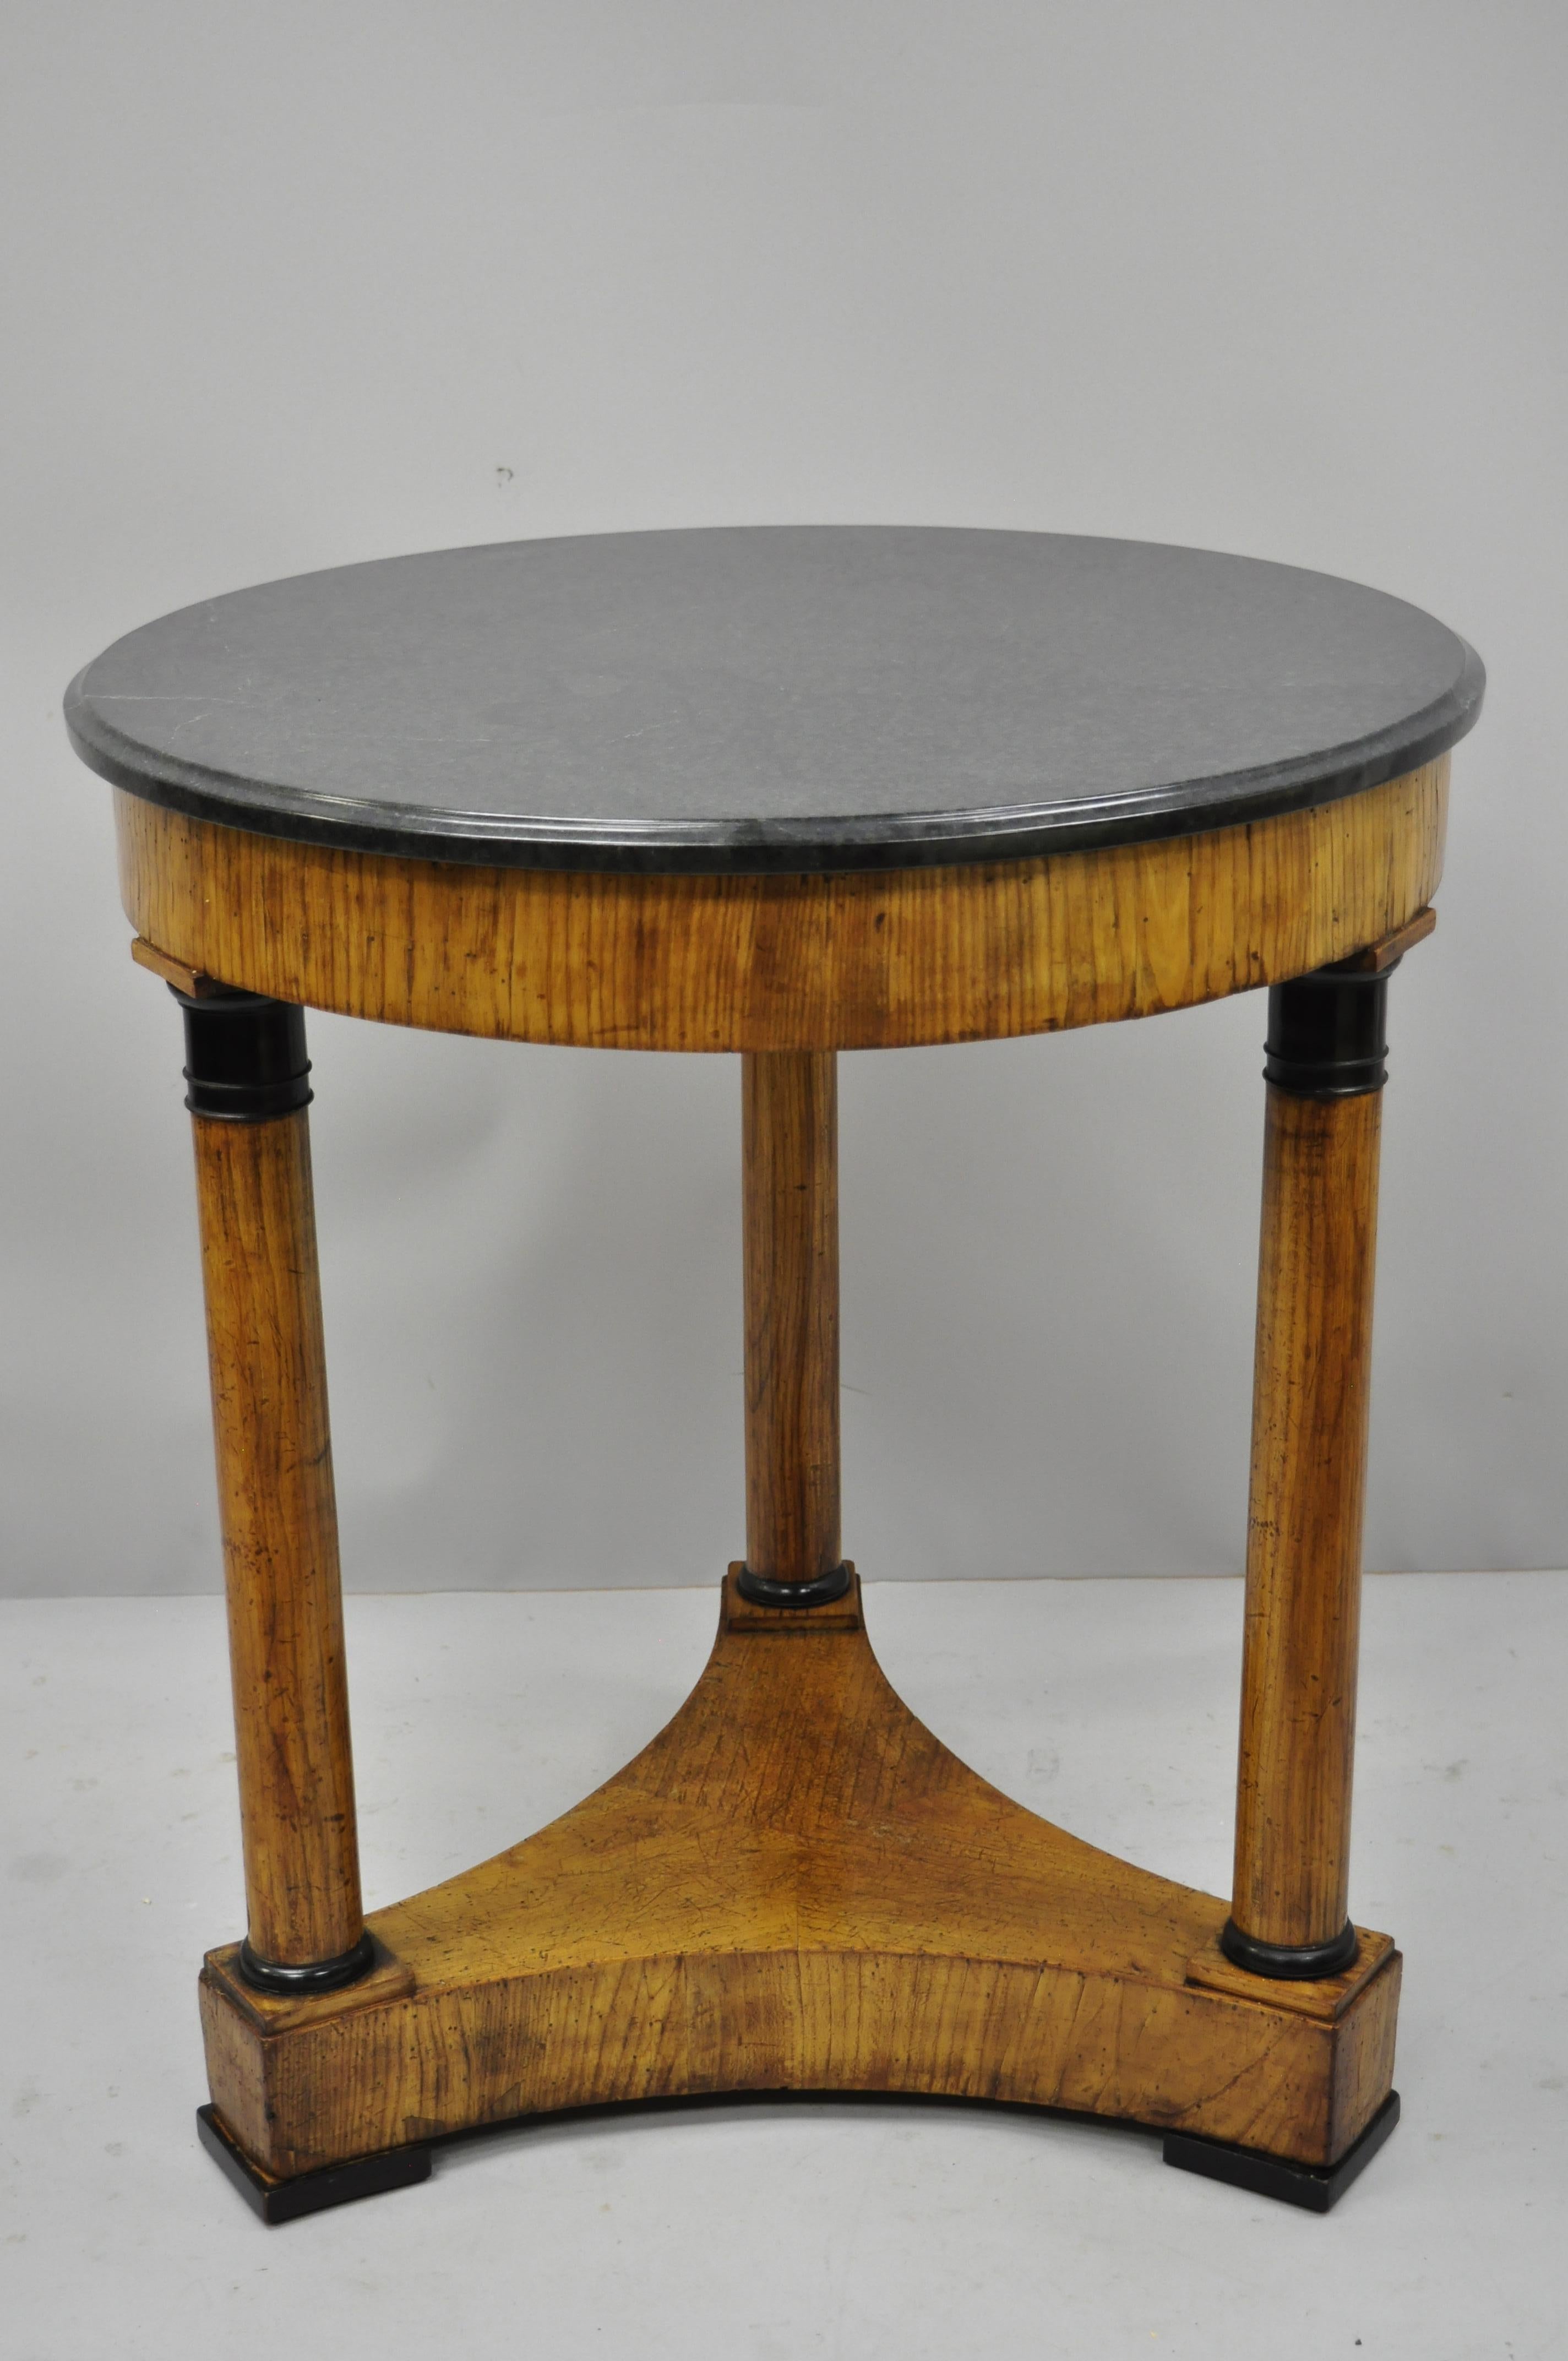 19th century French Empire style round marble-top center table. Item features round marble top, 3 column leg supports, black painted accents, authentic and desirable and distressed finish/patina, circa 19th century. Measurements: 28.5